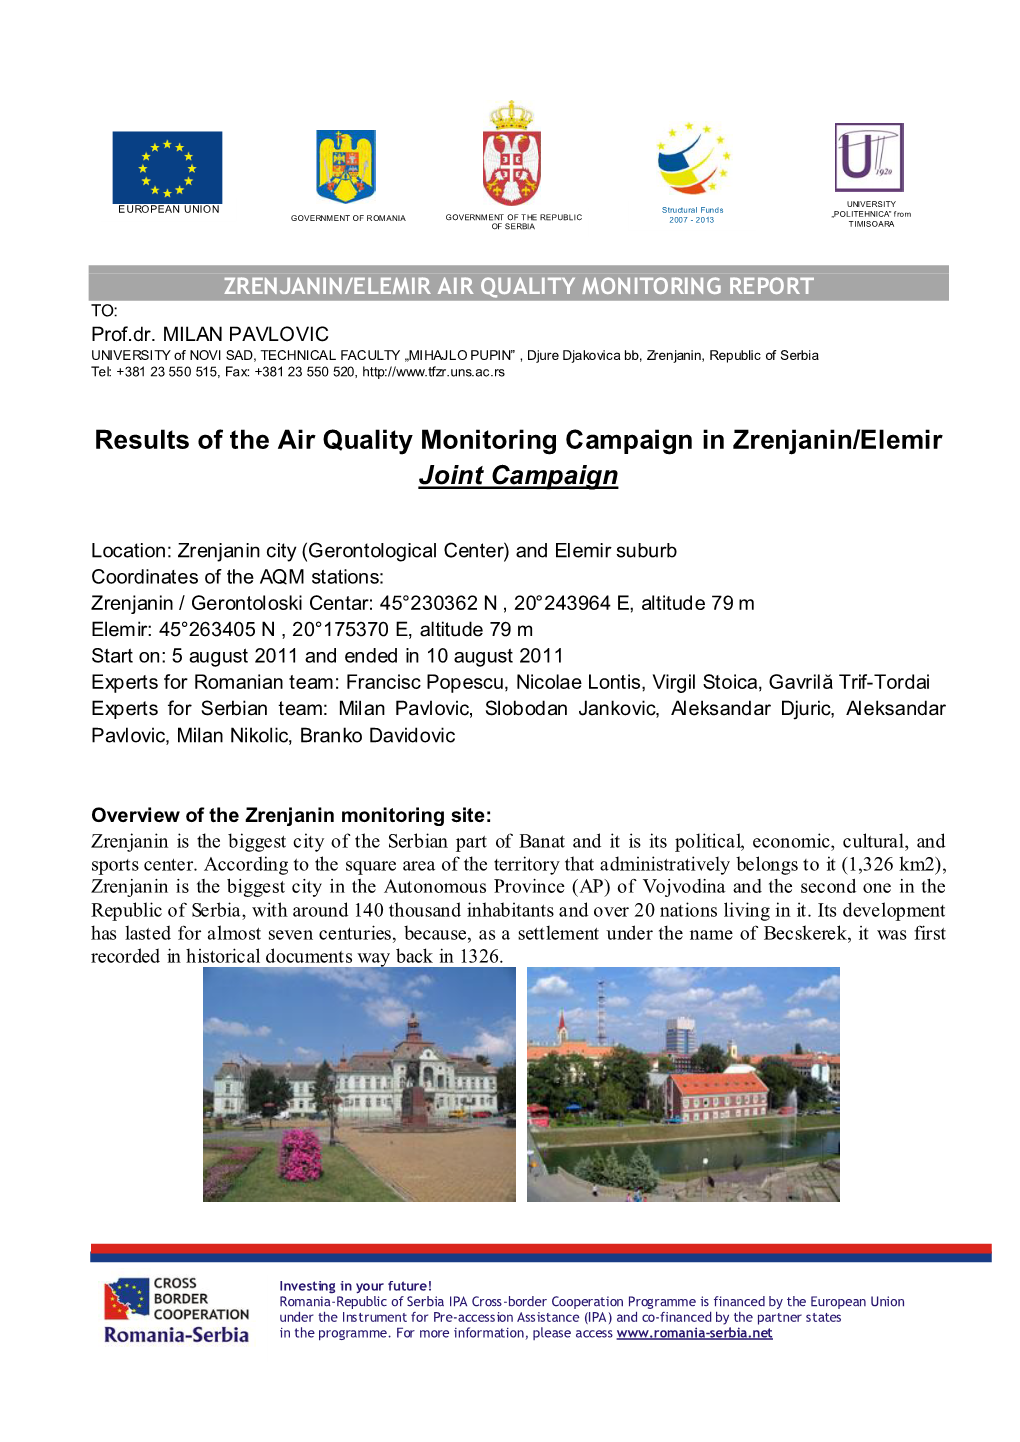 Results of the Air Quality Monitoring Campaign in Zrenjanin/Elemir Joint Campaign